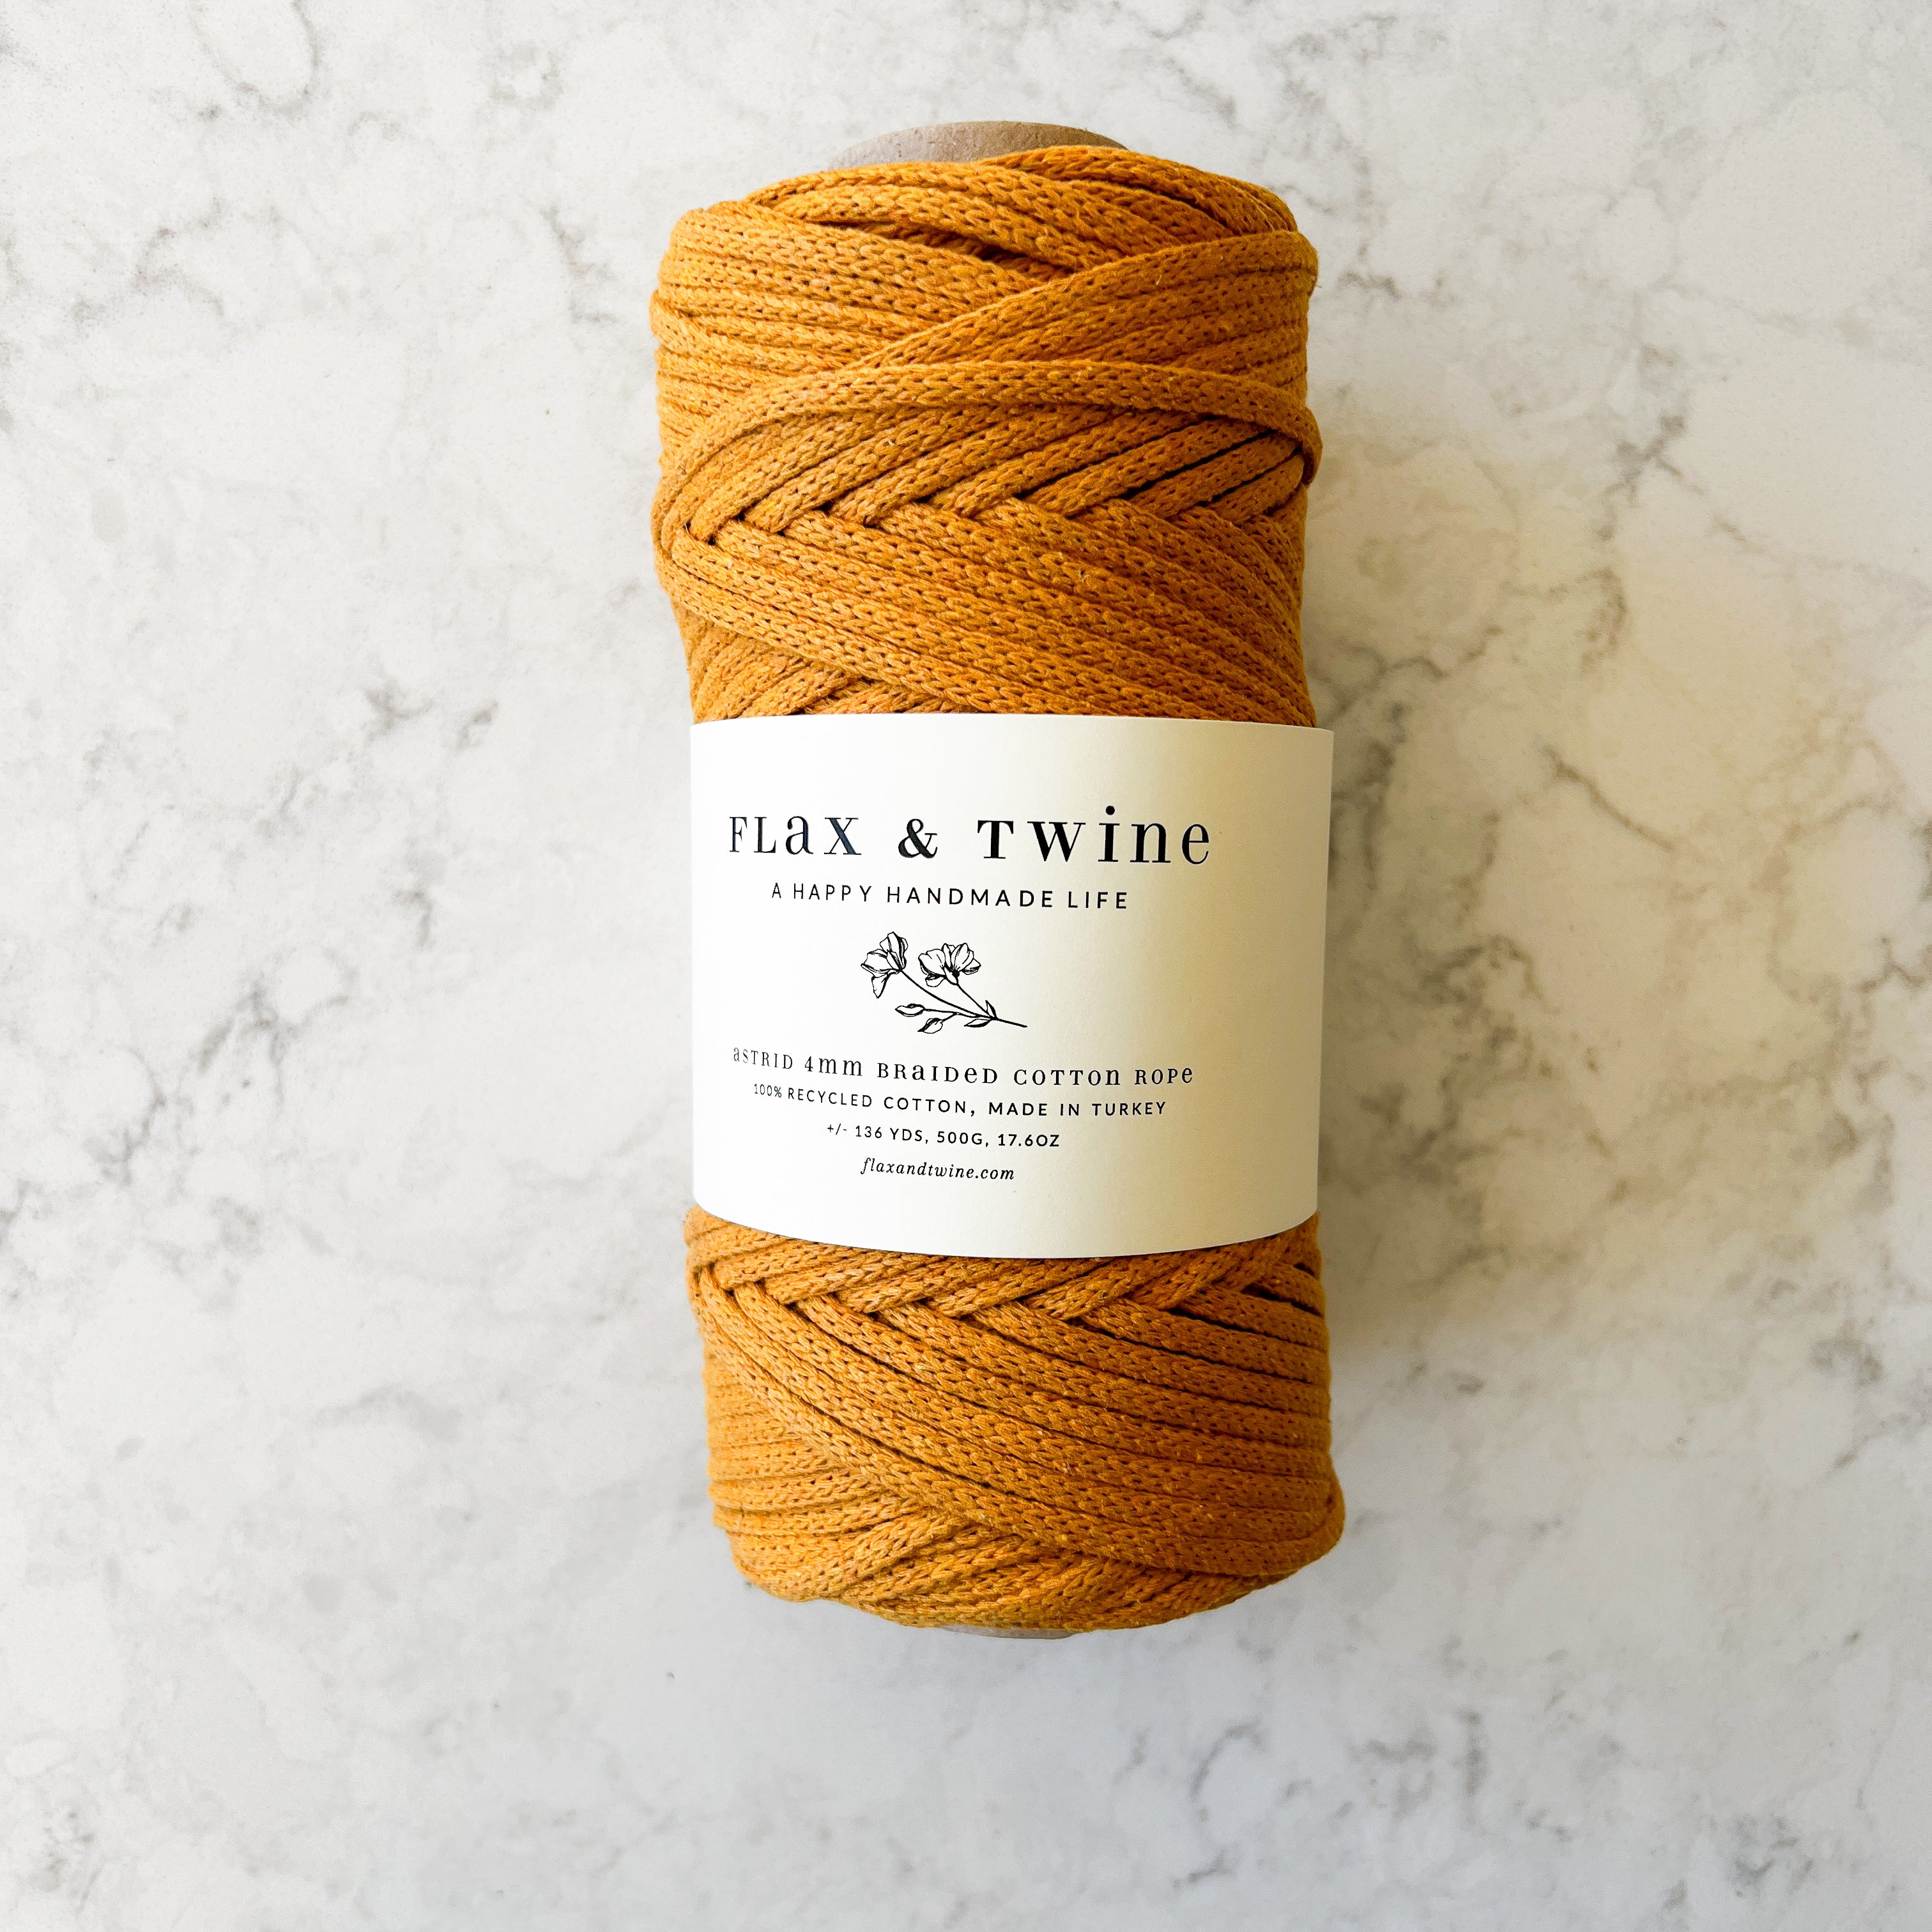 Flax & Twine Astrid 4mm Braided Cotton Rope